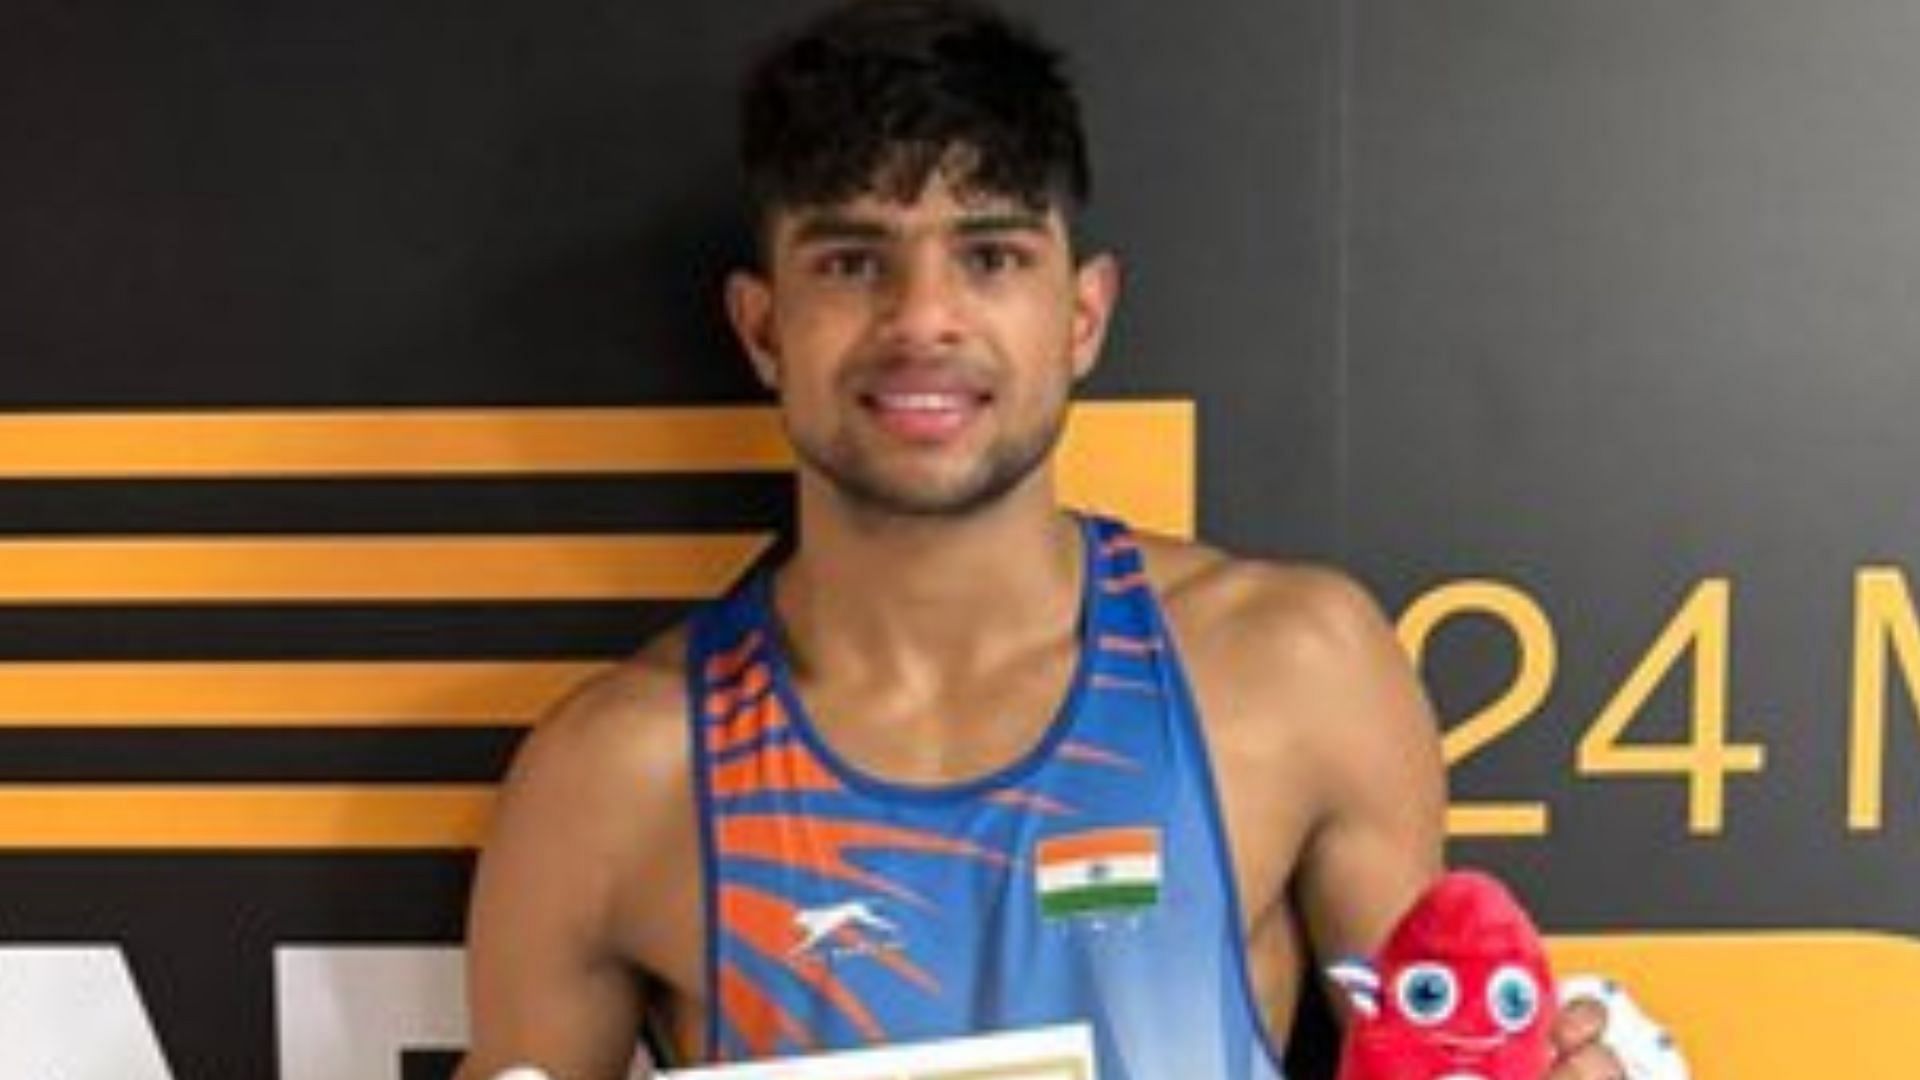 Boxer Nishant Dev bagged a ticket to the Paris Olympics with a strong showing at the qualifying tournament in Thailand